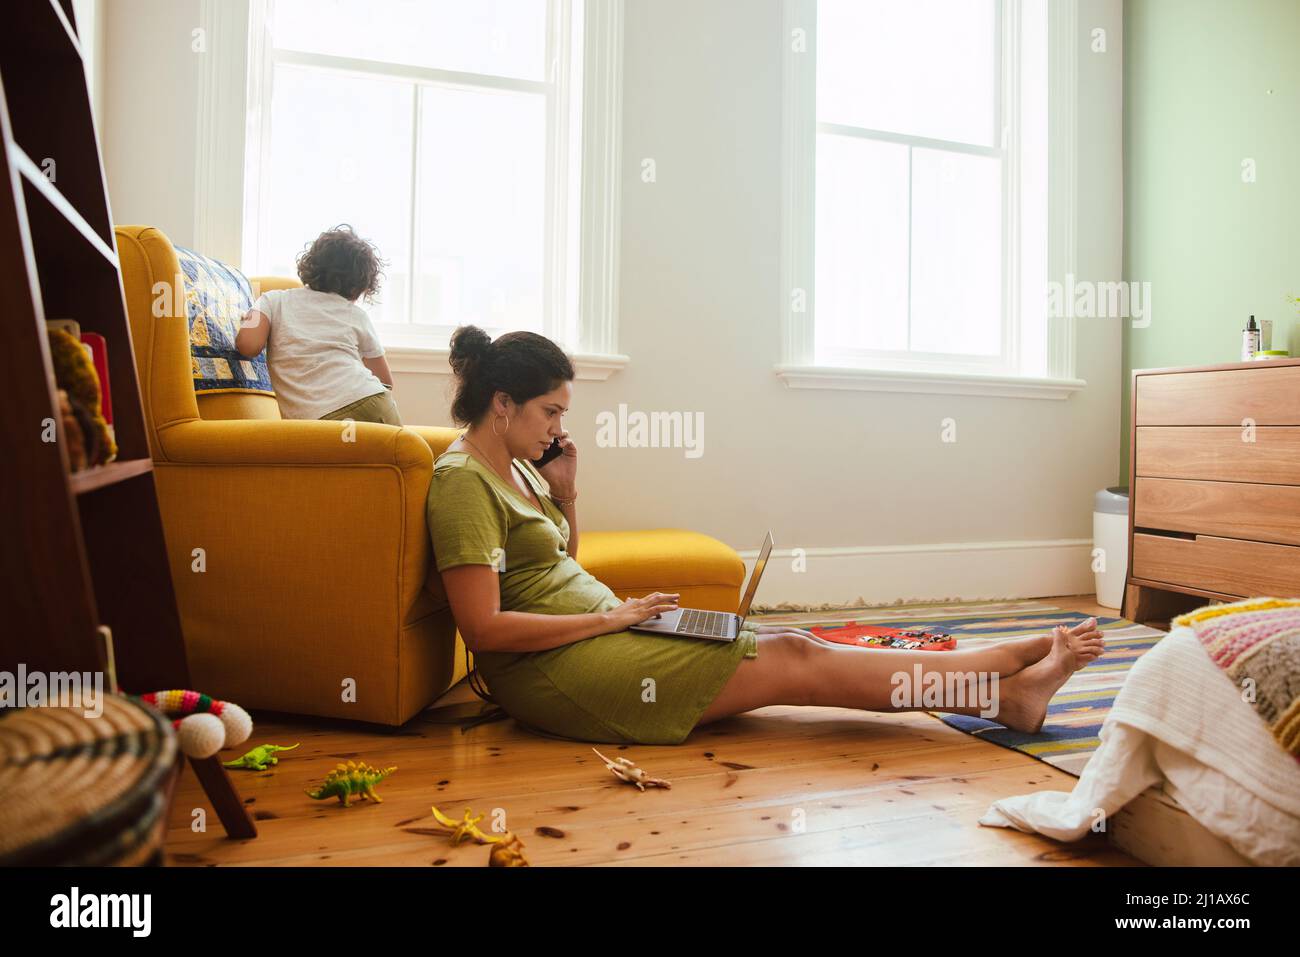 Mom working from home during quarantine. Working mom speaking on the phone while sitting in her son's play area. Single mother communicating with her Stock Photo